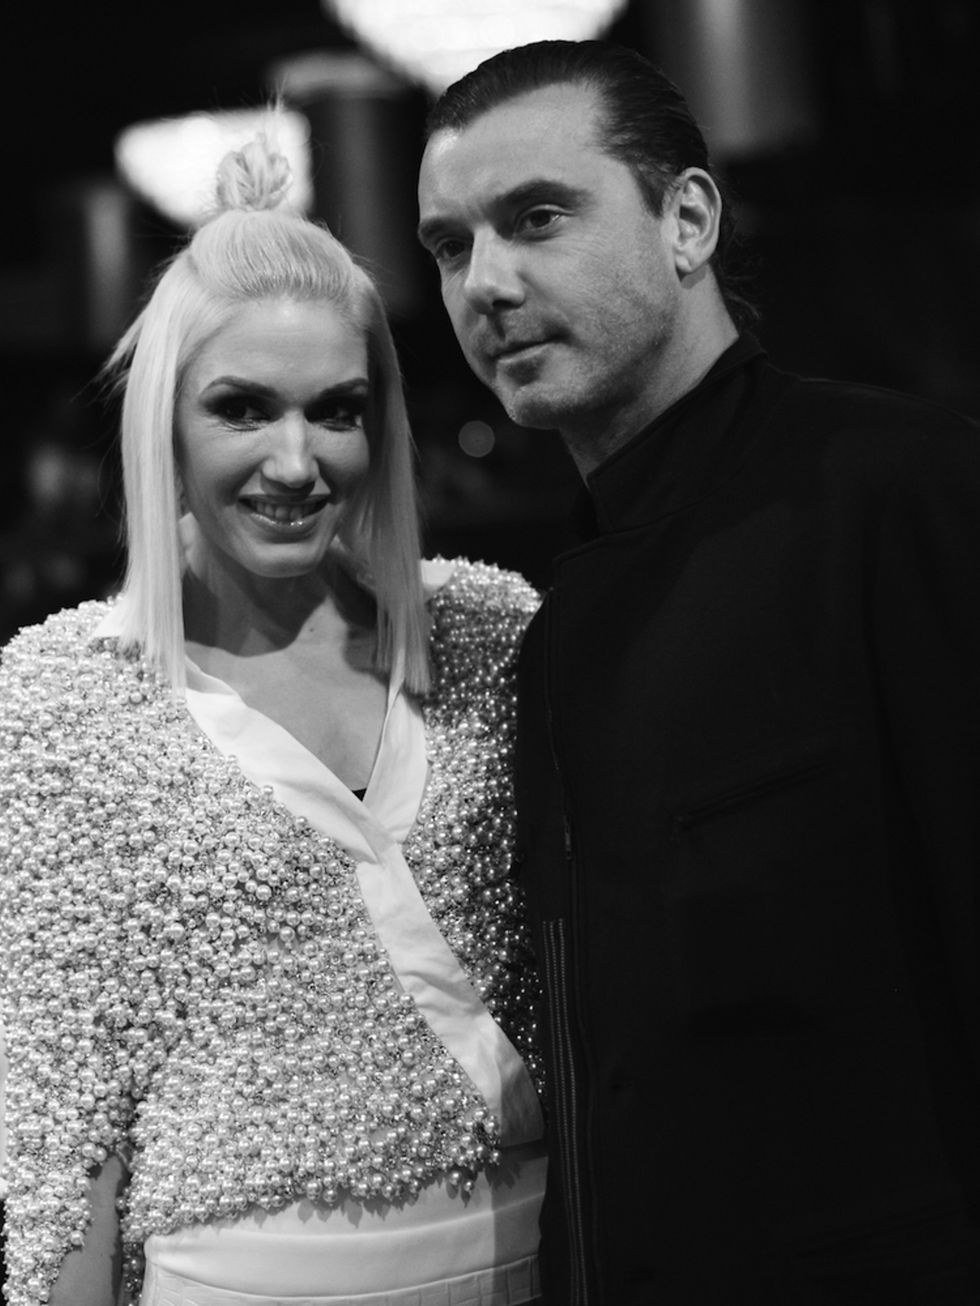 Gwen Stefani and Gavin Rossdale announced their split on August 3, 2015 after claims that he had been unfaithful.